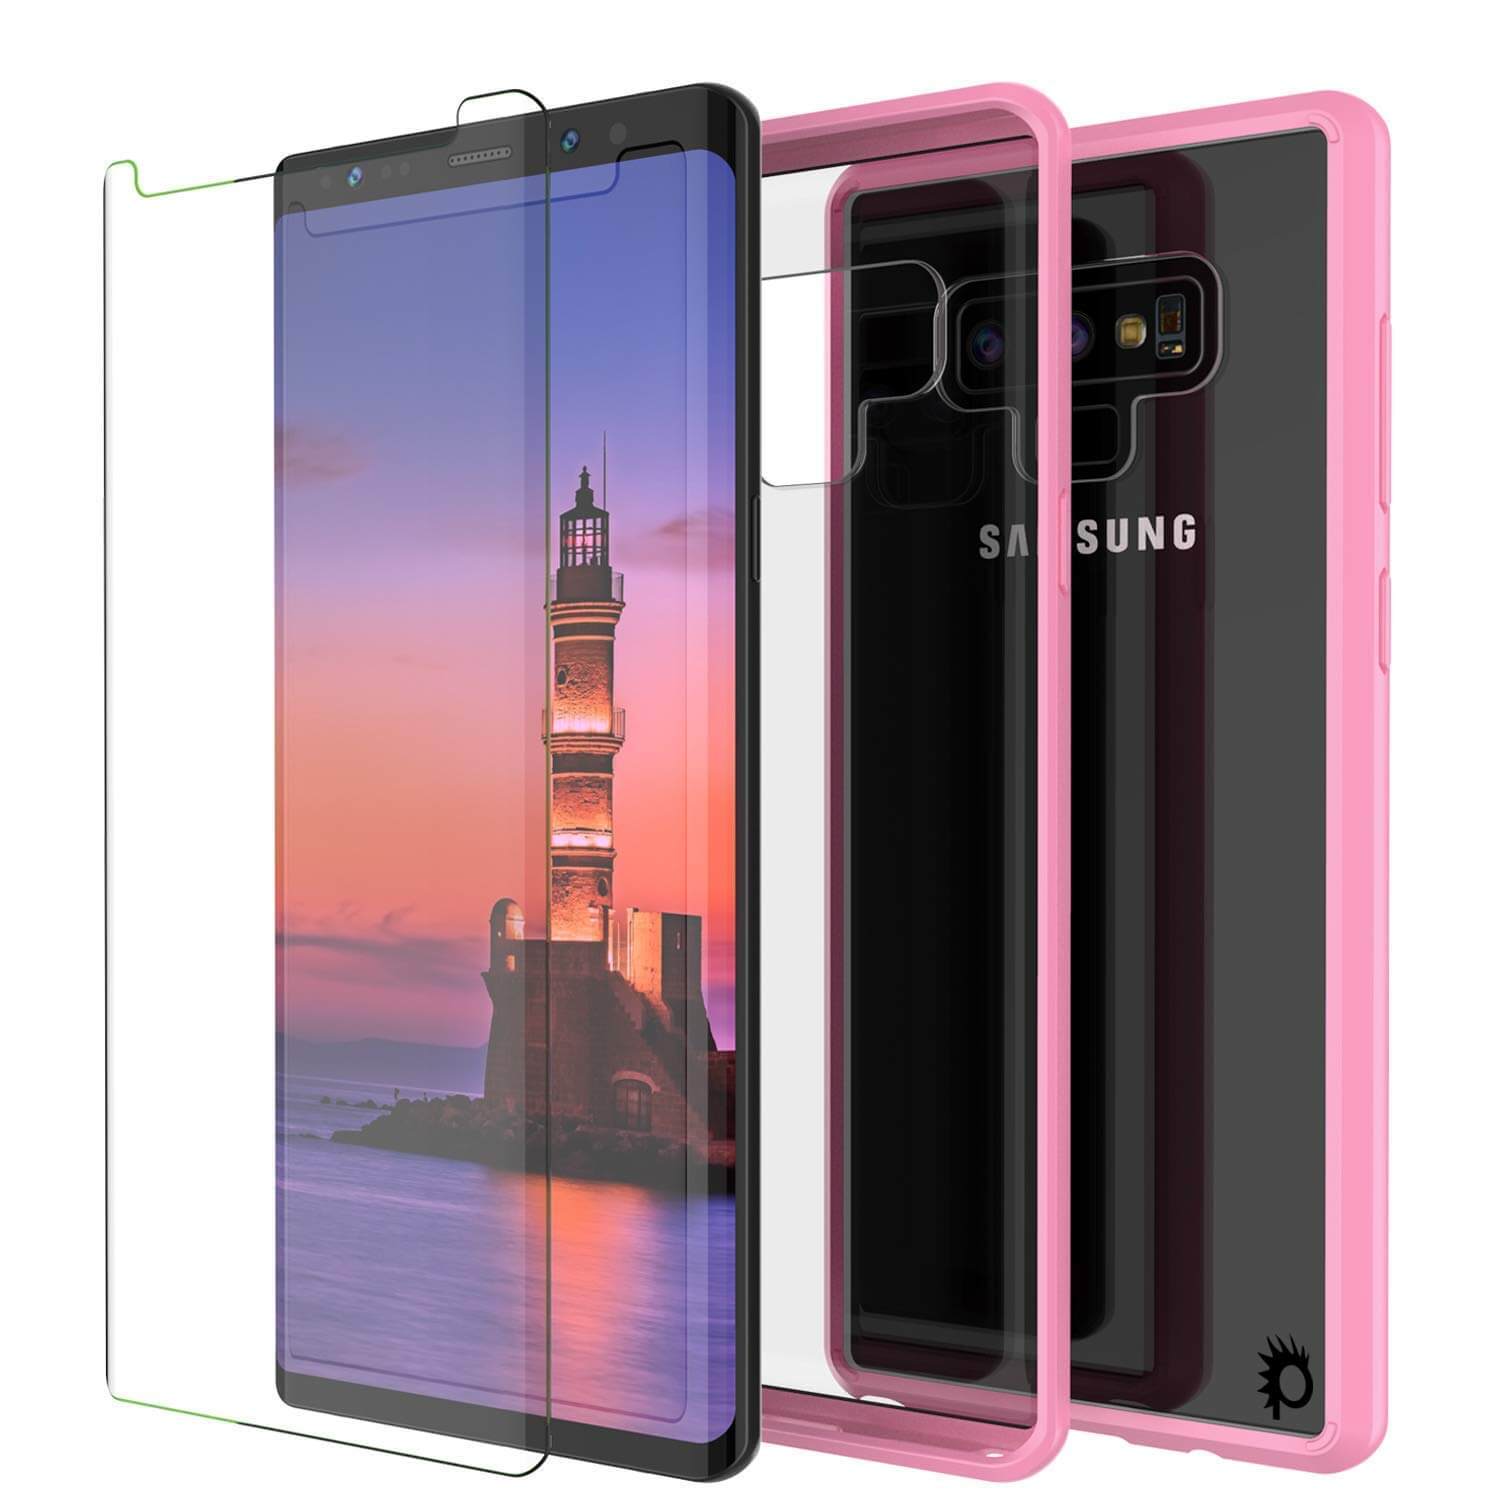 Galaxy Note 9 Case, PUNKcase [LUCID 2.0 Series] [Slim Fit] Armor Cover W/Integrated Anti-Shock System [Pink]